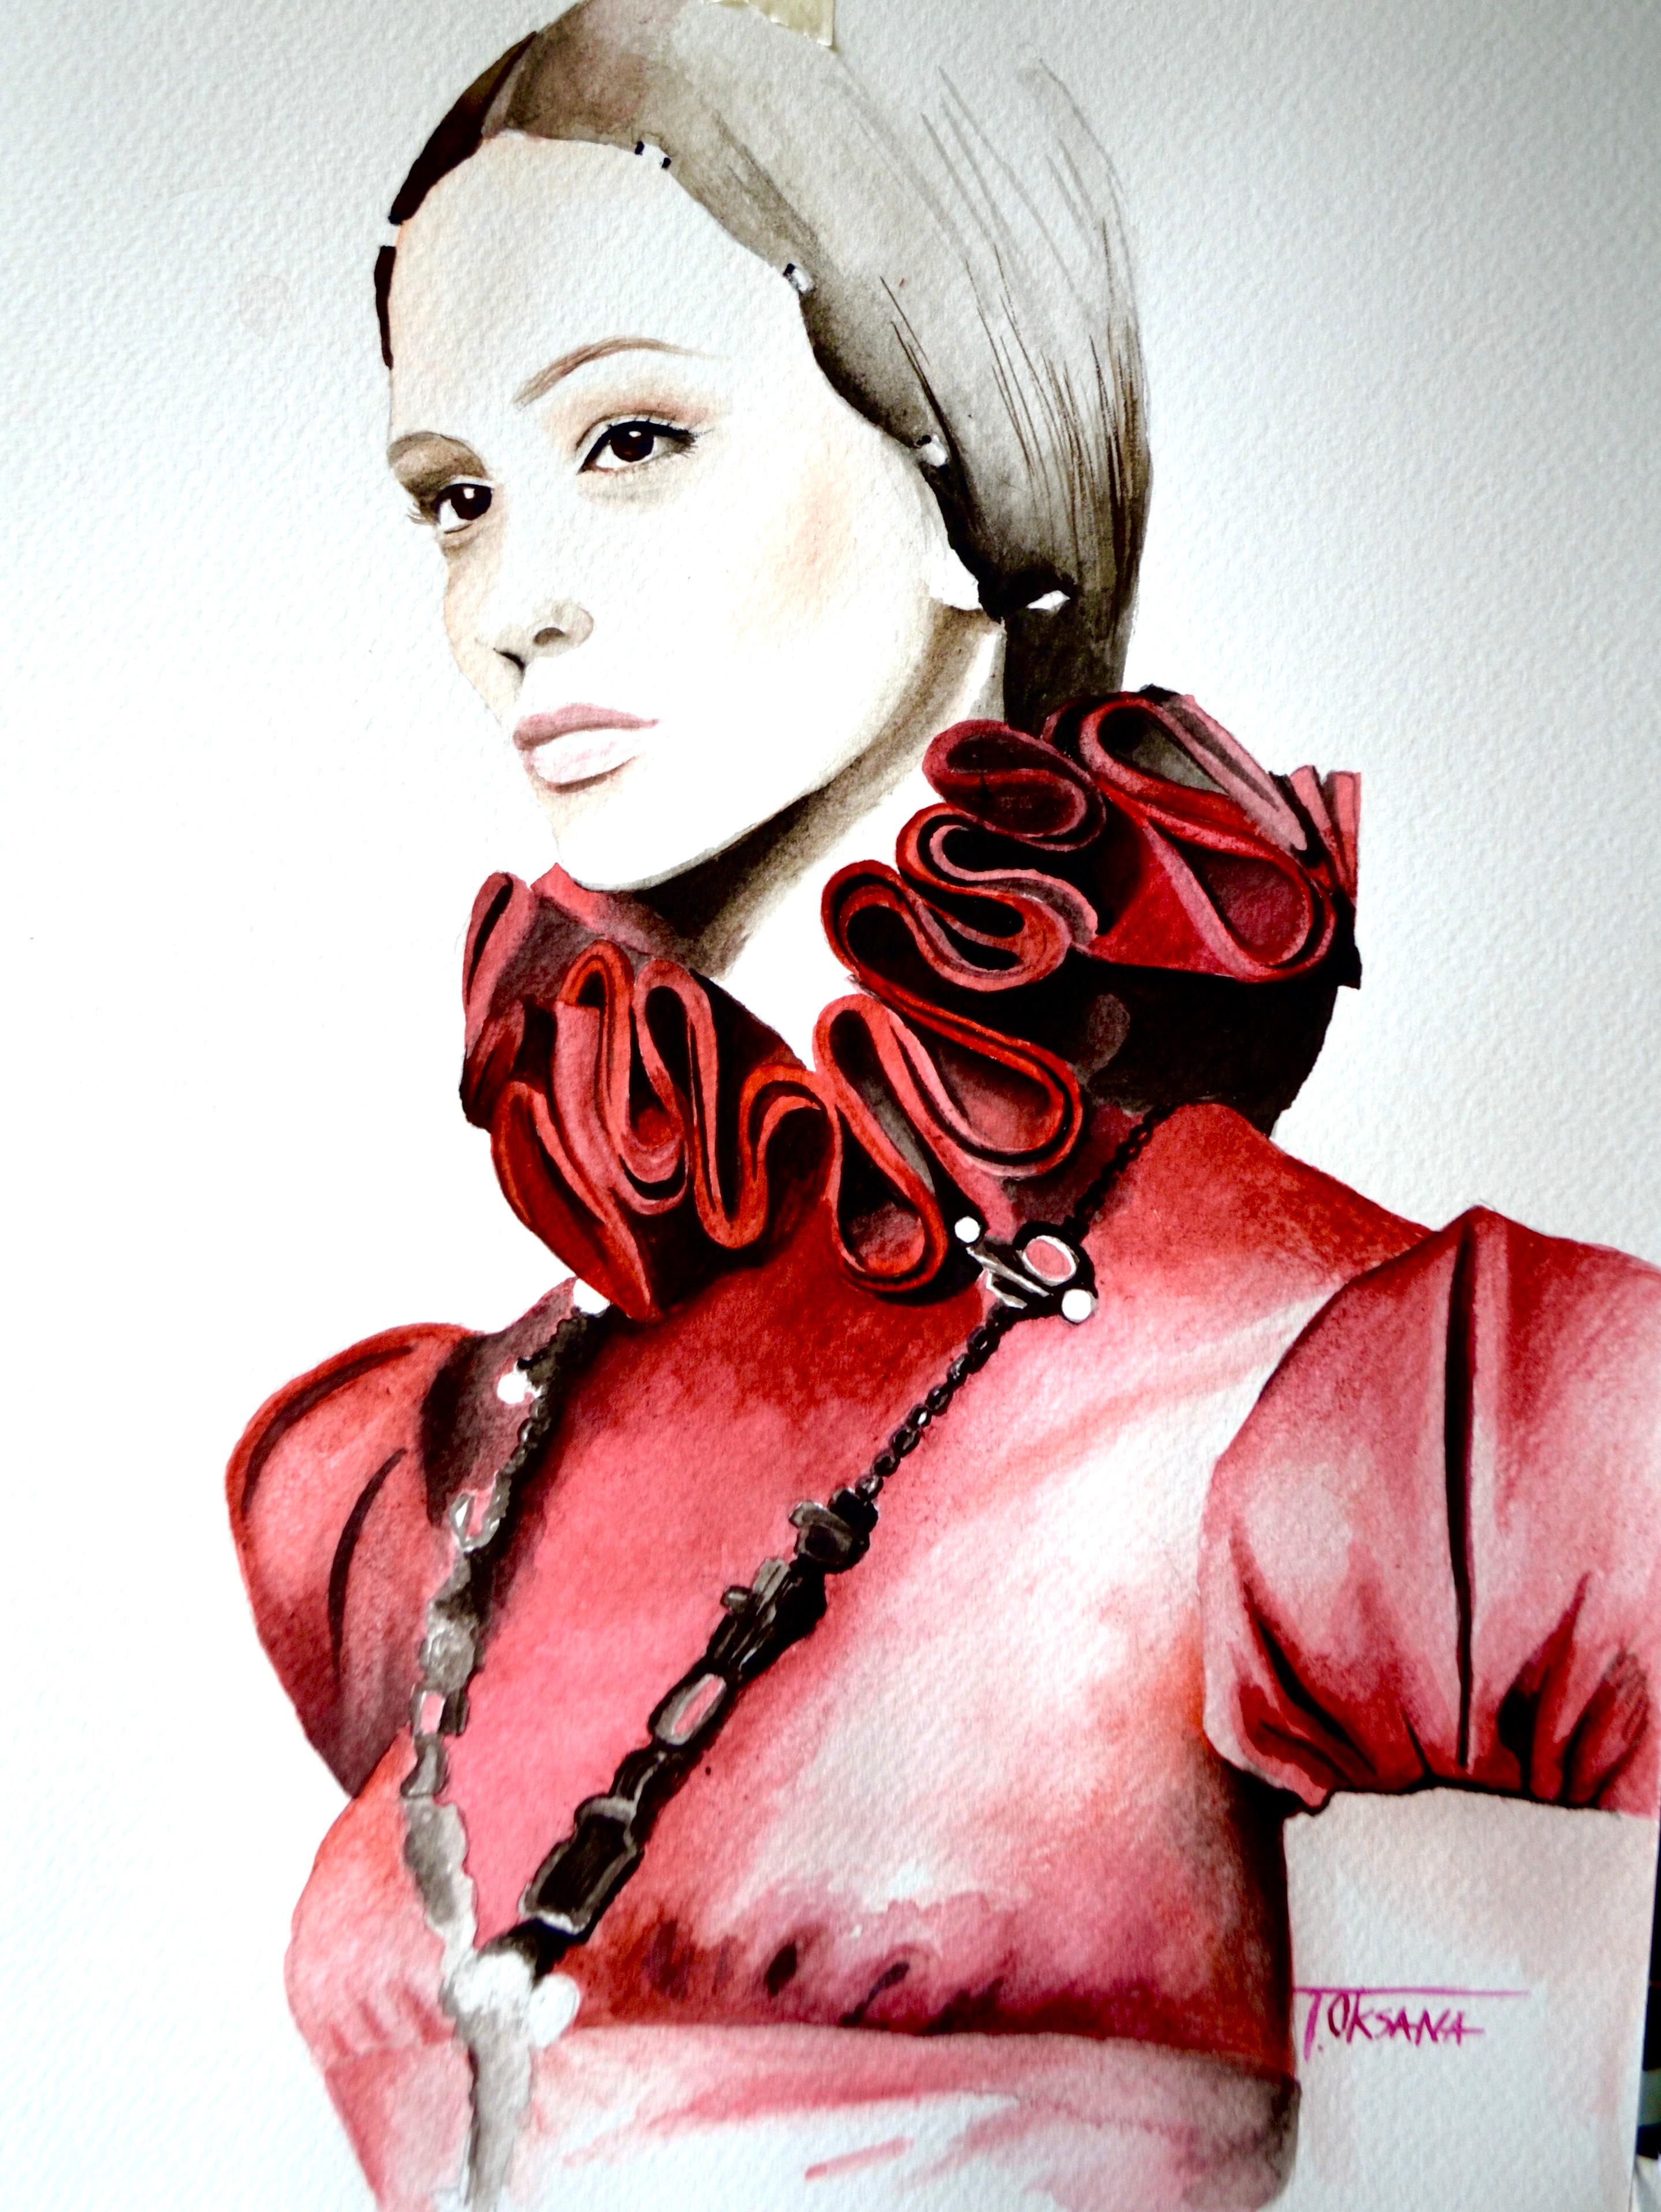 What are fashion illustrations used for?